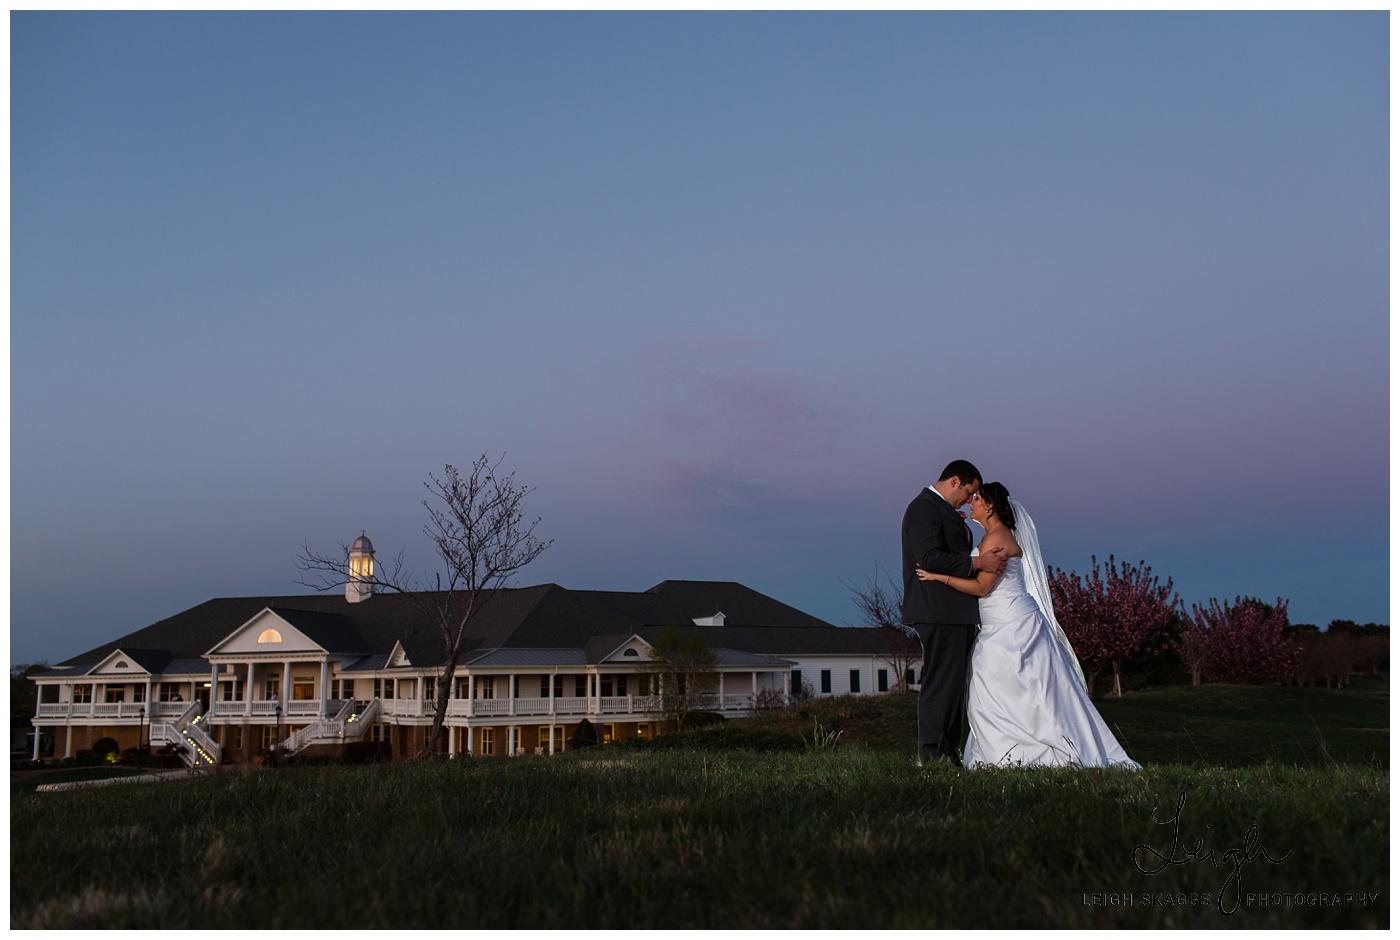 Wisteria spring wedding at the Colonial Heritage Golf Club in Williamsburg Virginia!